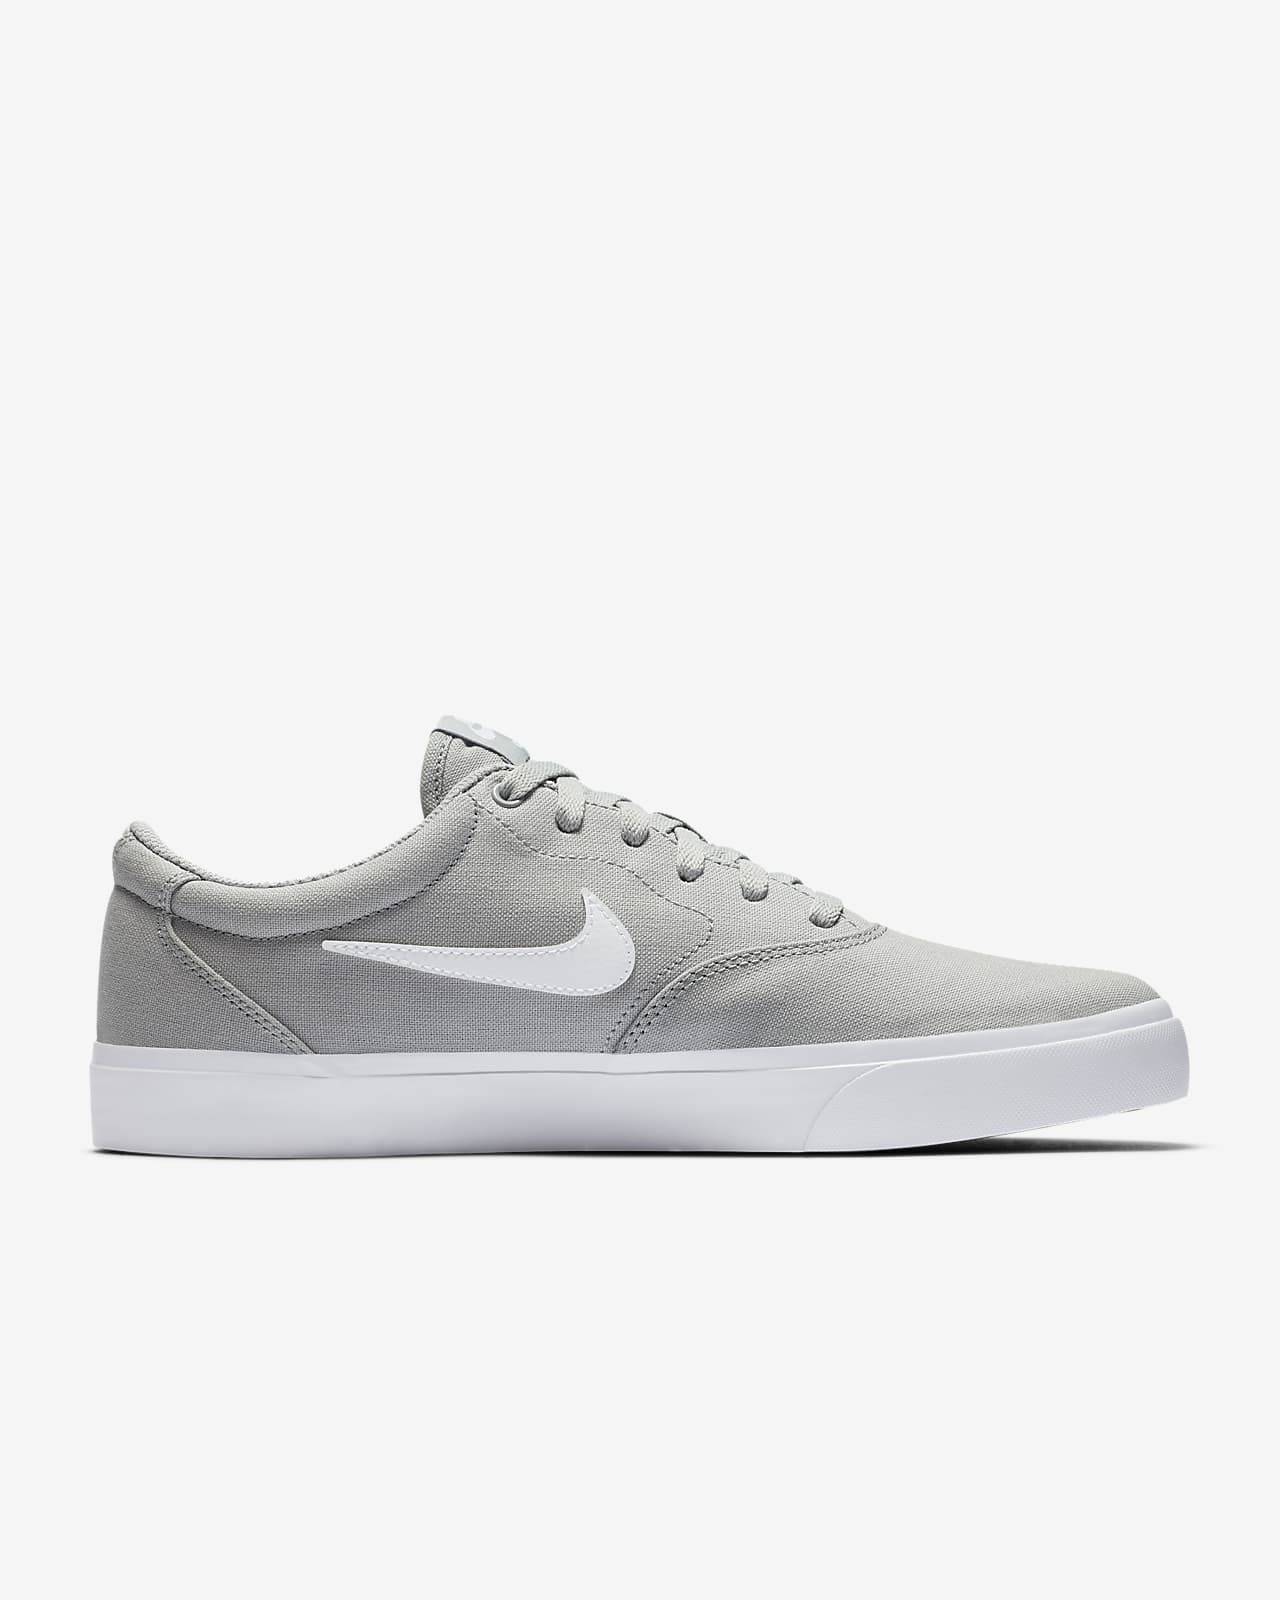 nike black white and grey shoes